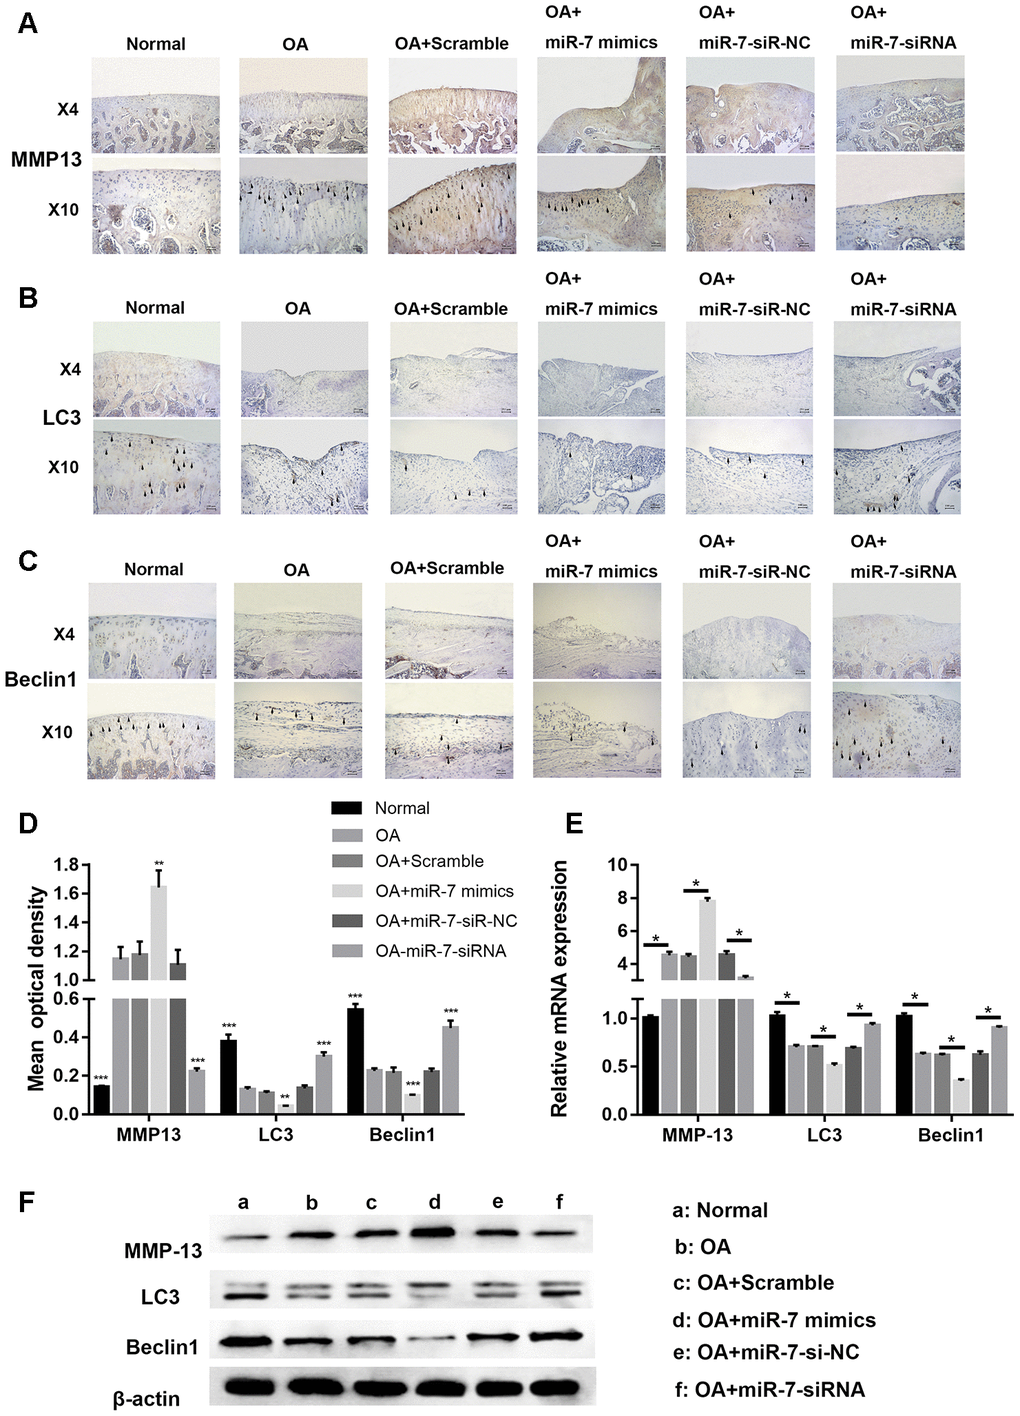 Representative images of immunohistochemical staining for (A) MMP13, (B) LC3, and (C) Bcelin1; (D) Quantitative optical density analysis of immunohistochemical staining for different groups; (E) mRNA and (F) protein expression of MMP13, LC3, and Beclin1. Data represent the mean ± SD (n = 10), ** p p 